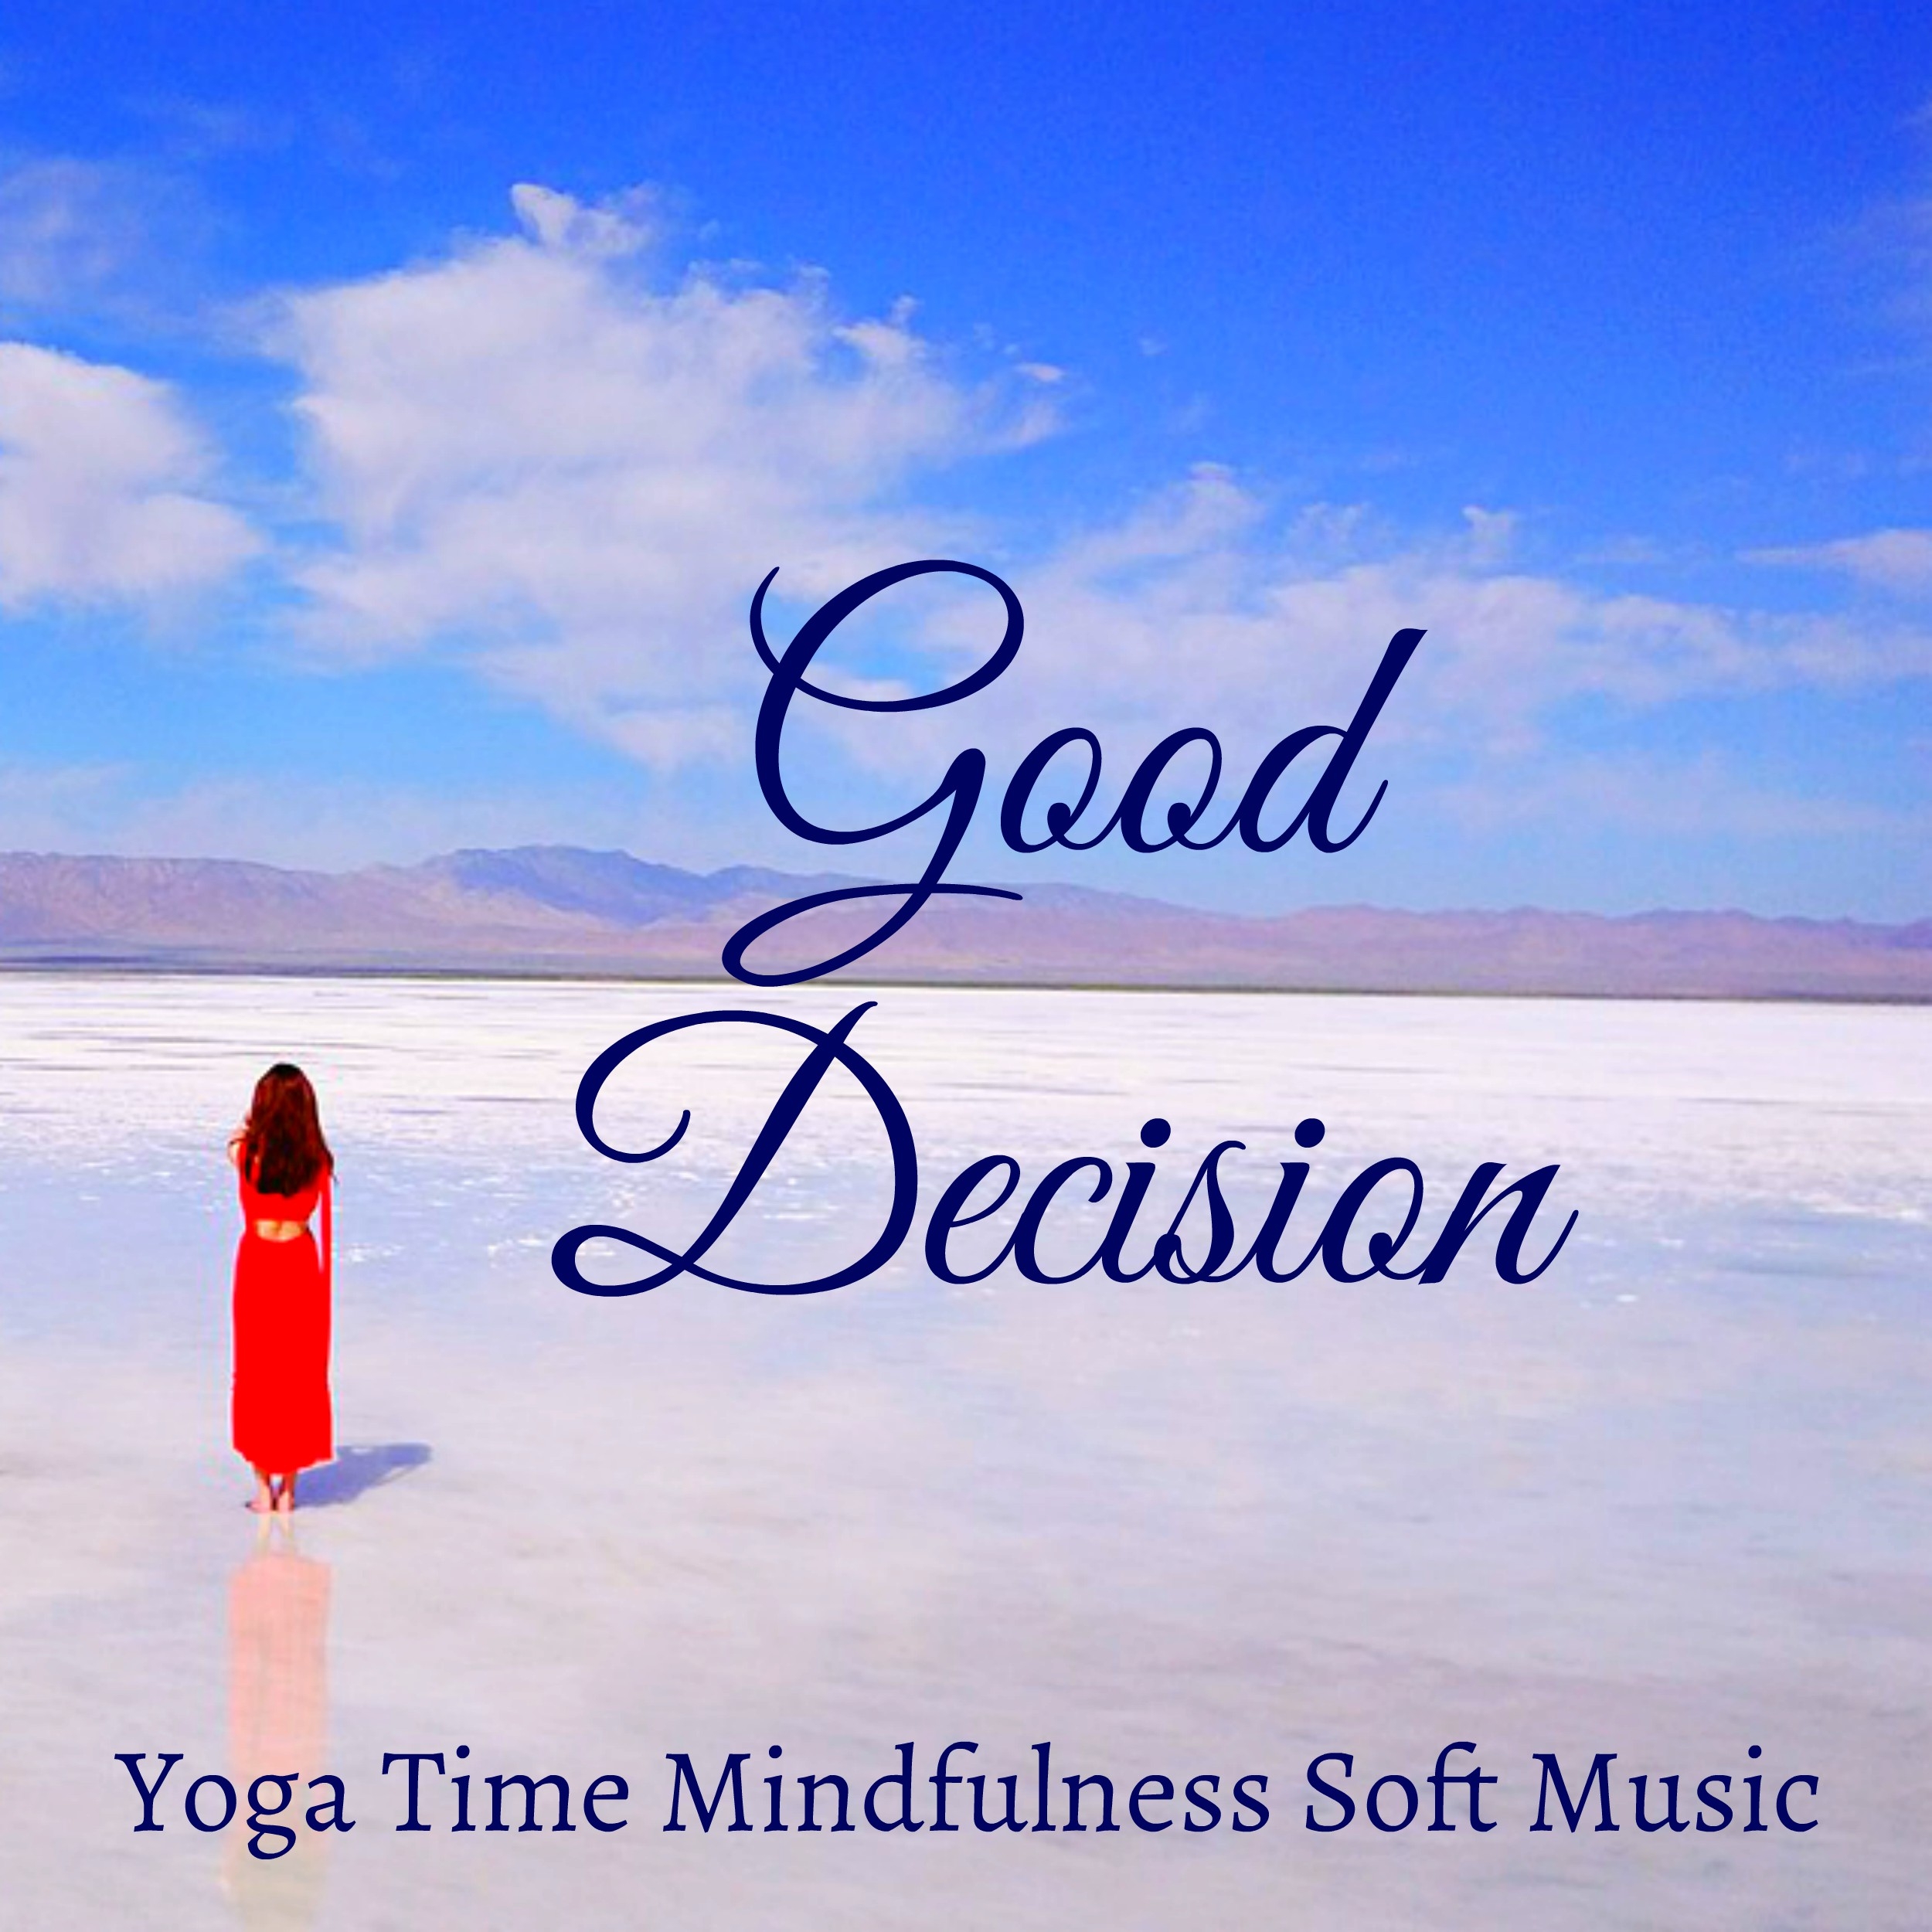 Good Decision - Yoga Time Mindfulness Soft Music for Wellness Inner Peace Natural Stress Relief with Instrumental New Age Sounds